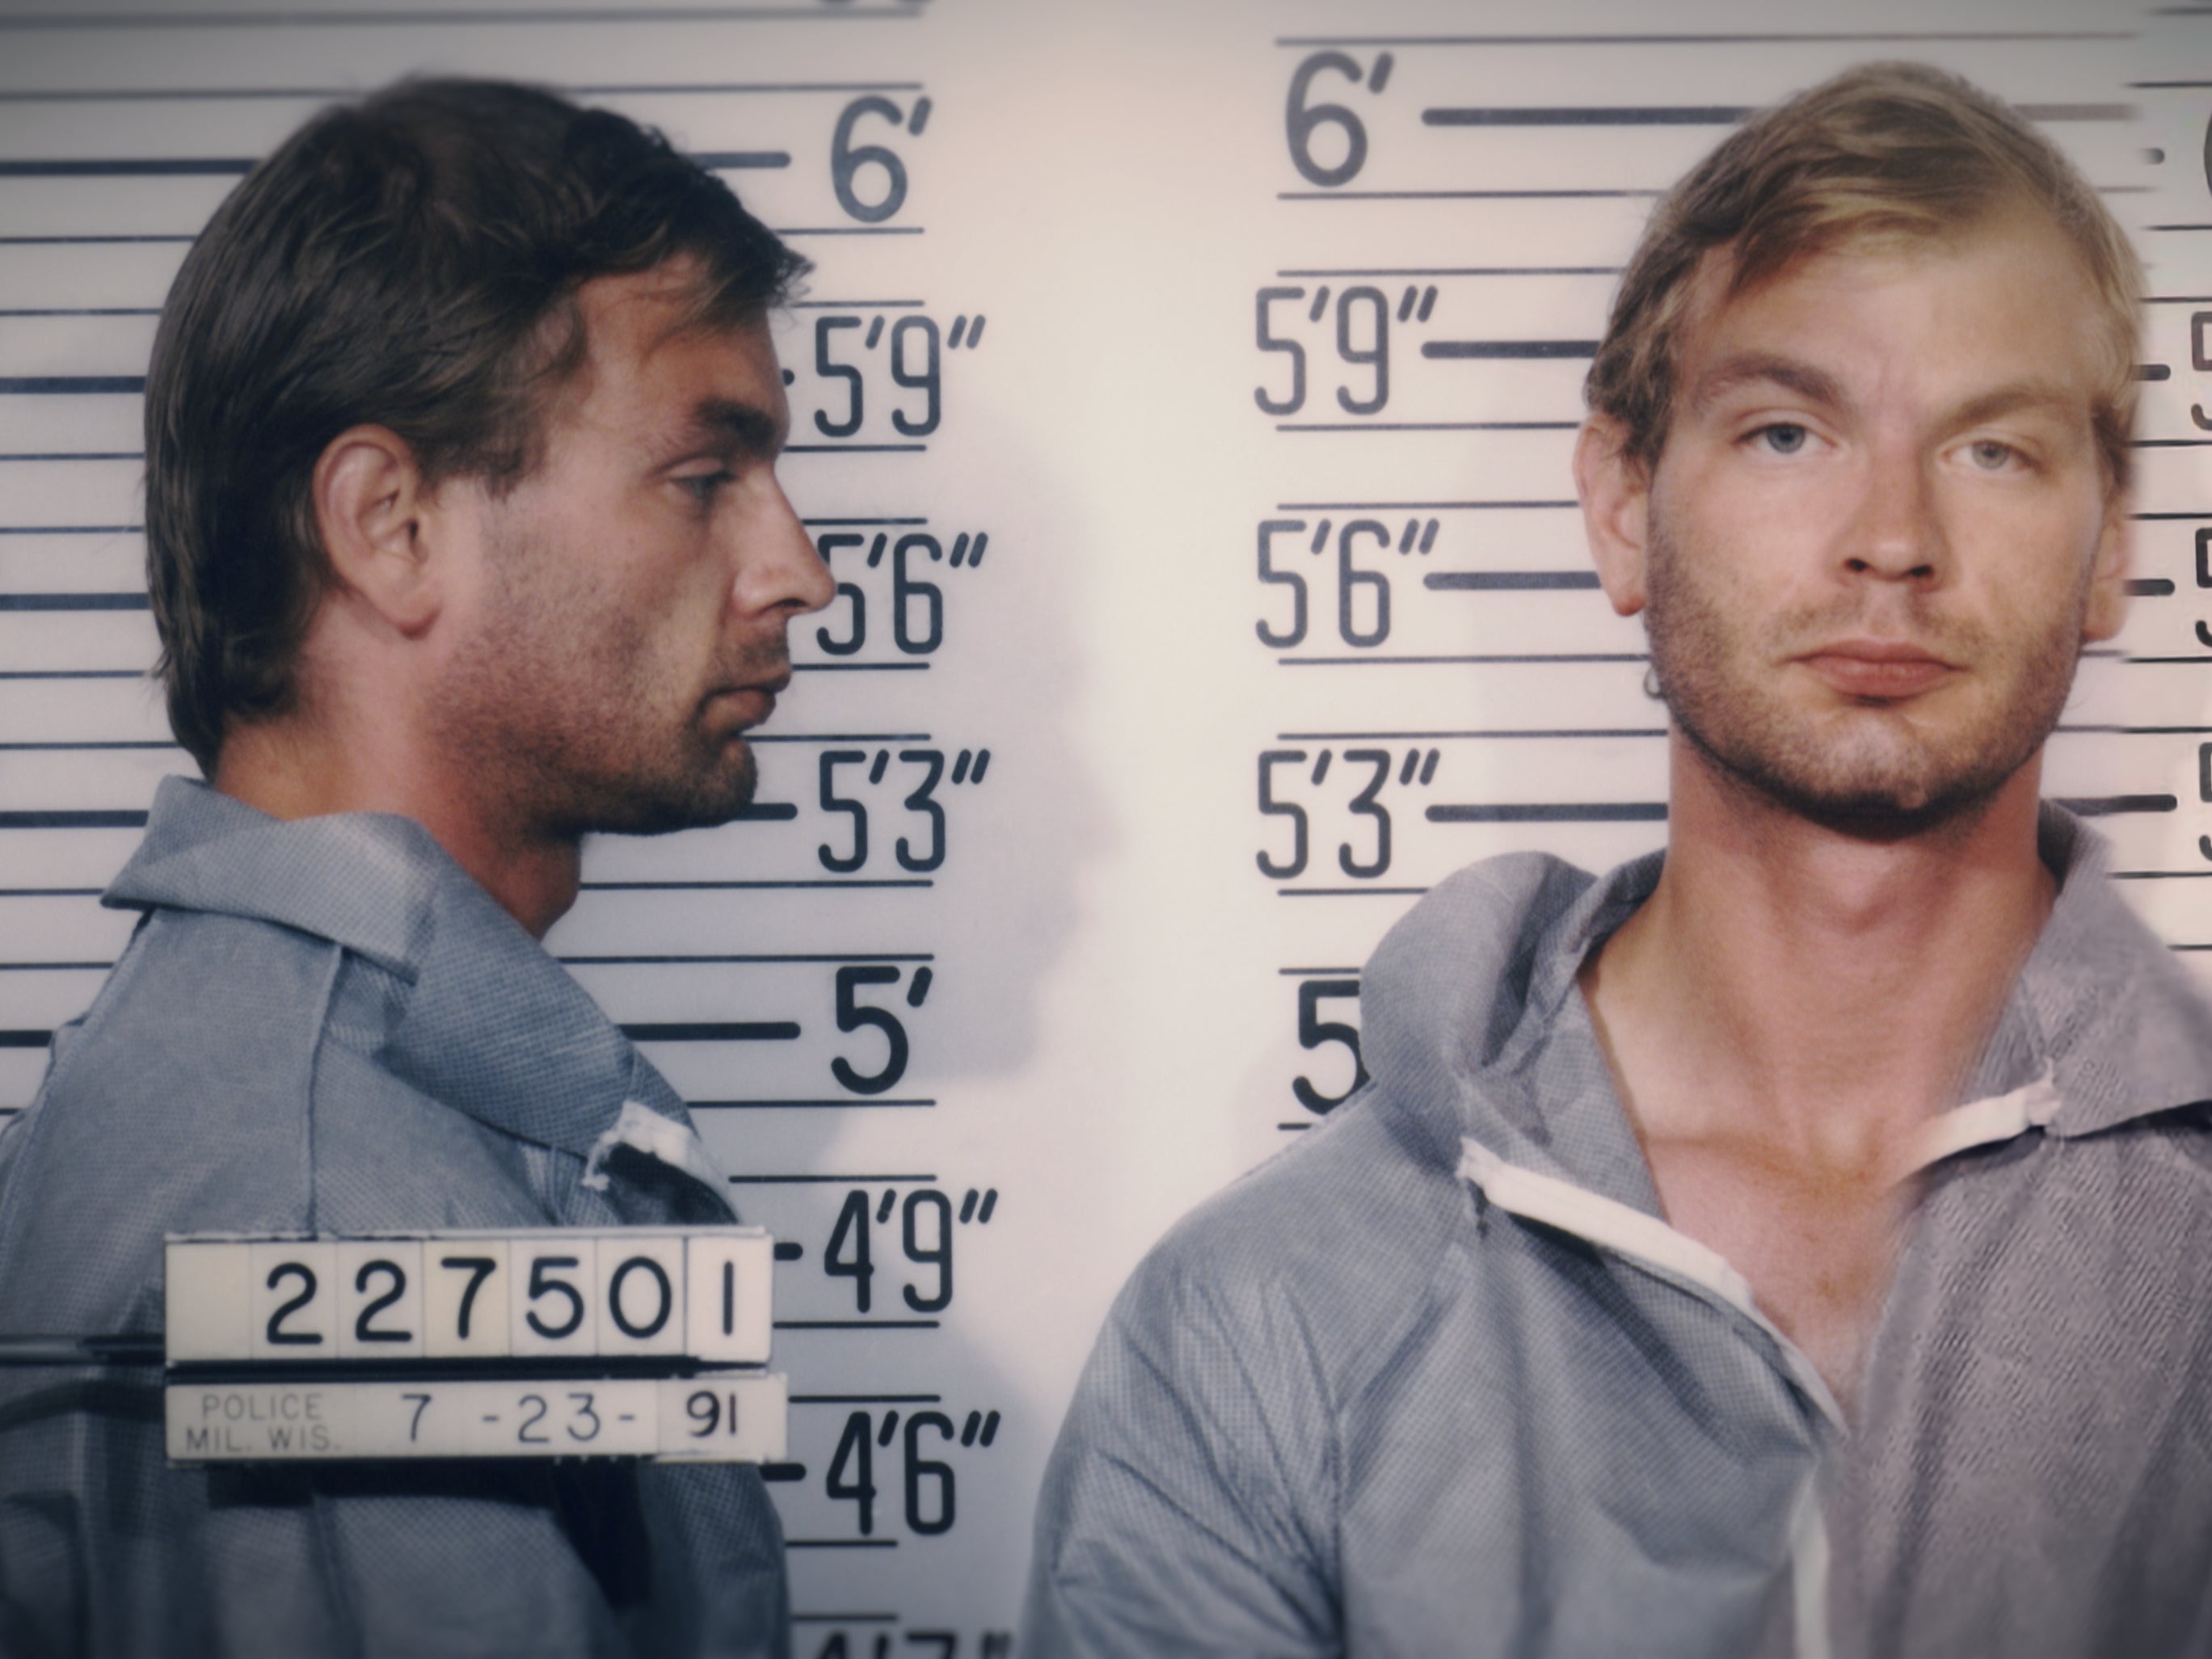 Family members of Dahmer’s victims have mixed opinions on the latest shows